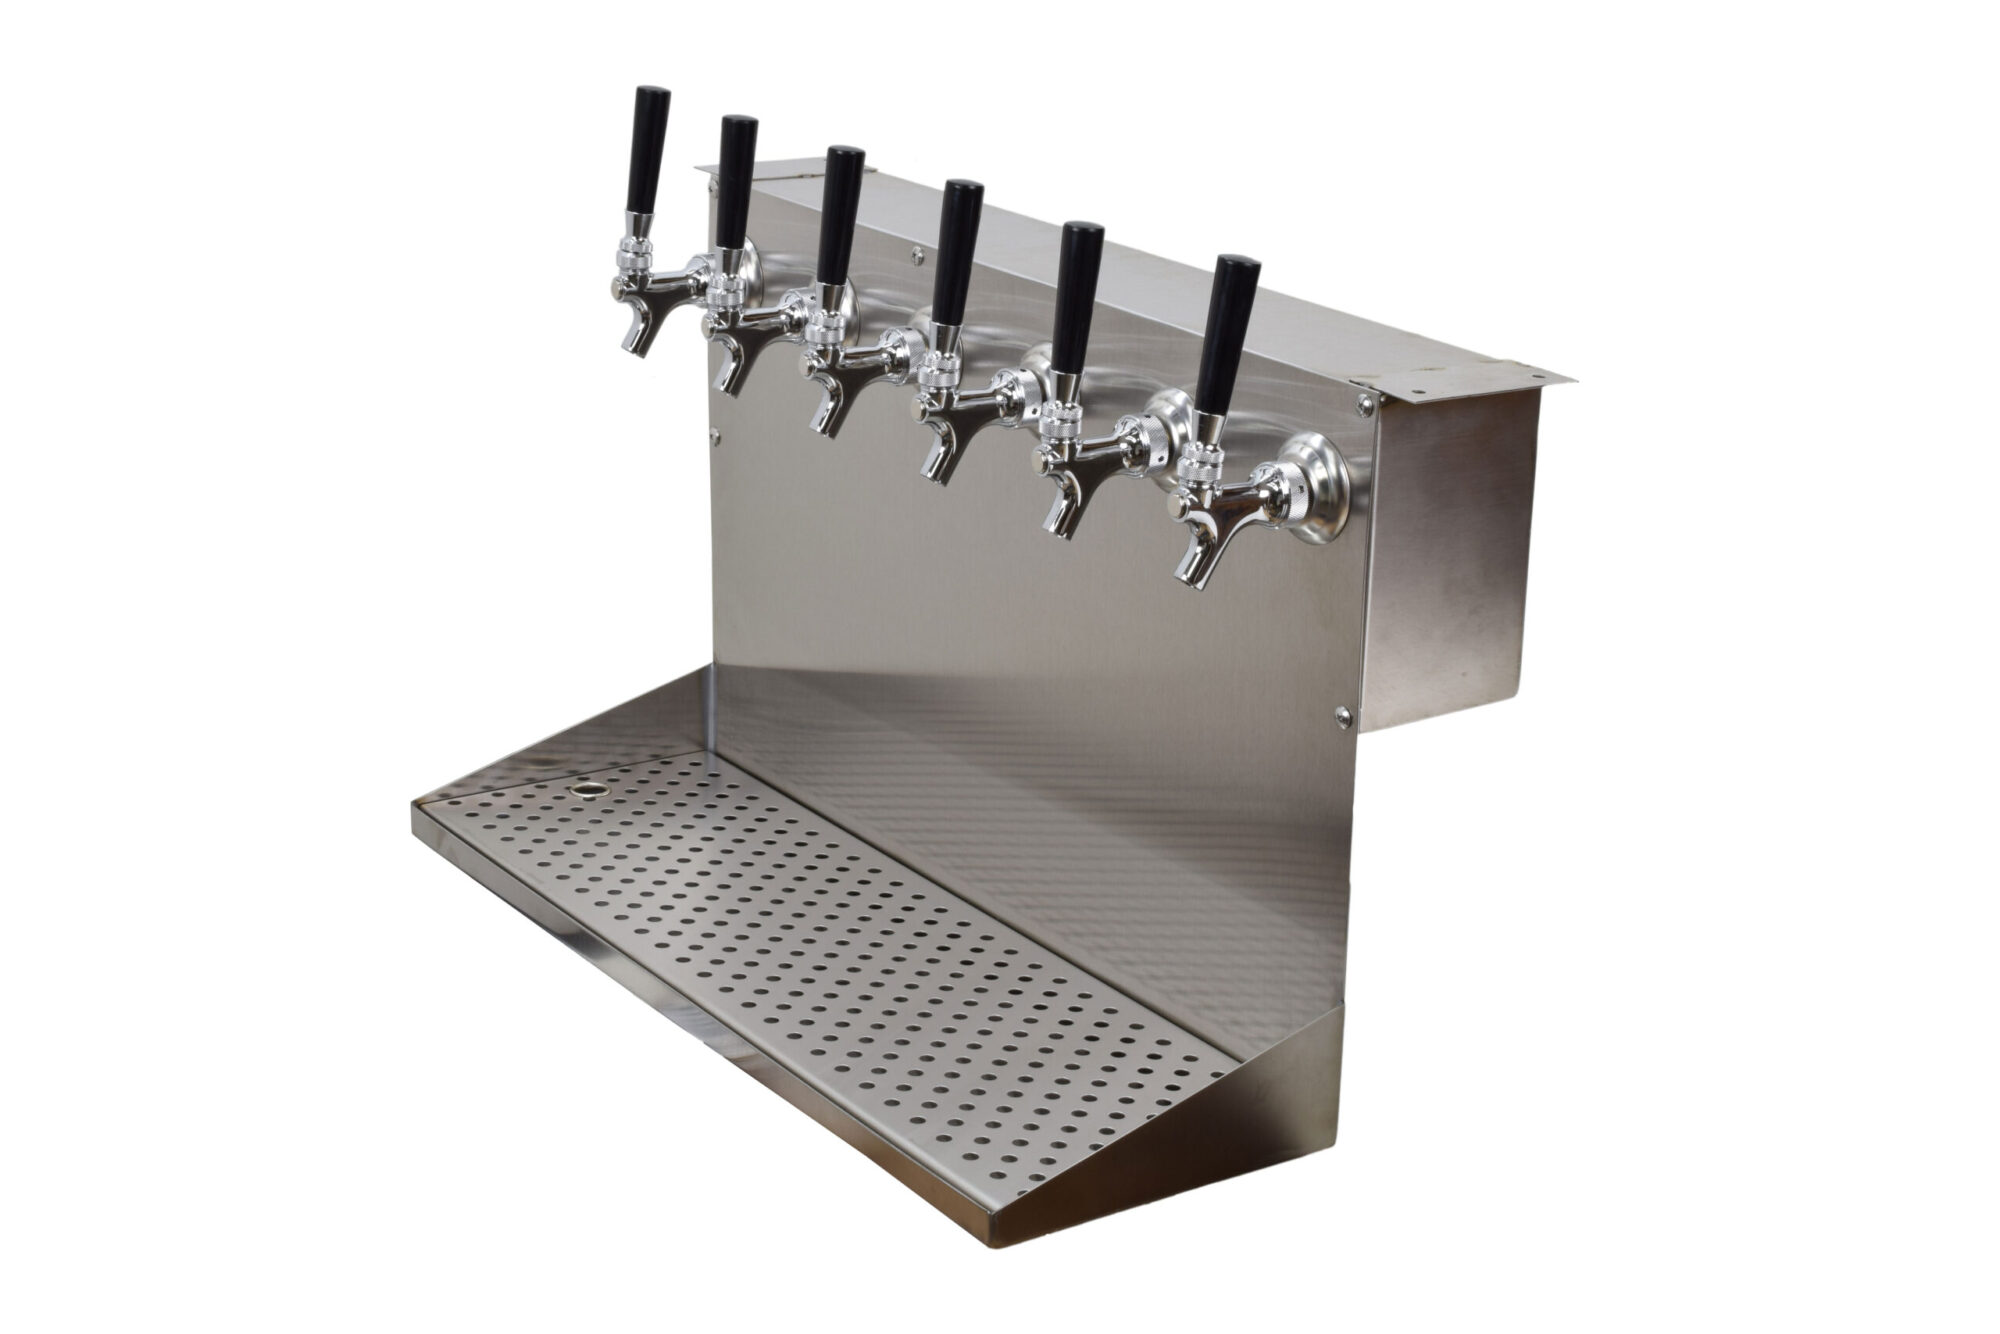 688-6G Six Faucet Under Bar Dispensing Tower - 24" L x 14" H x 8" W Drip Tray - Access For Lines Out the Back or Bottom